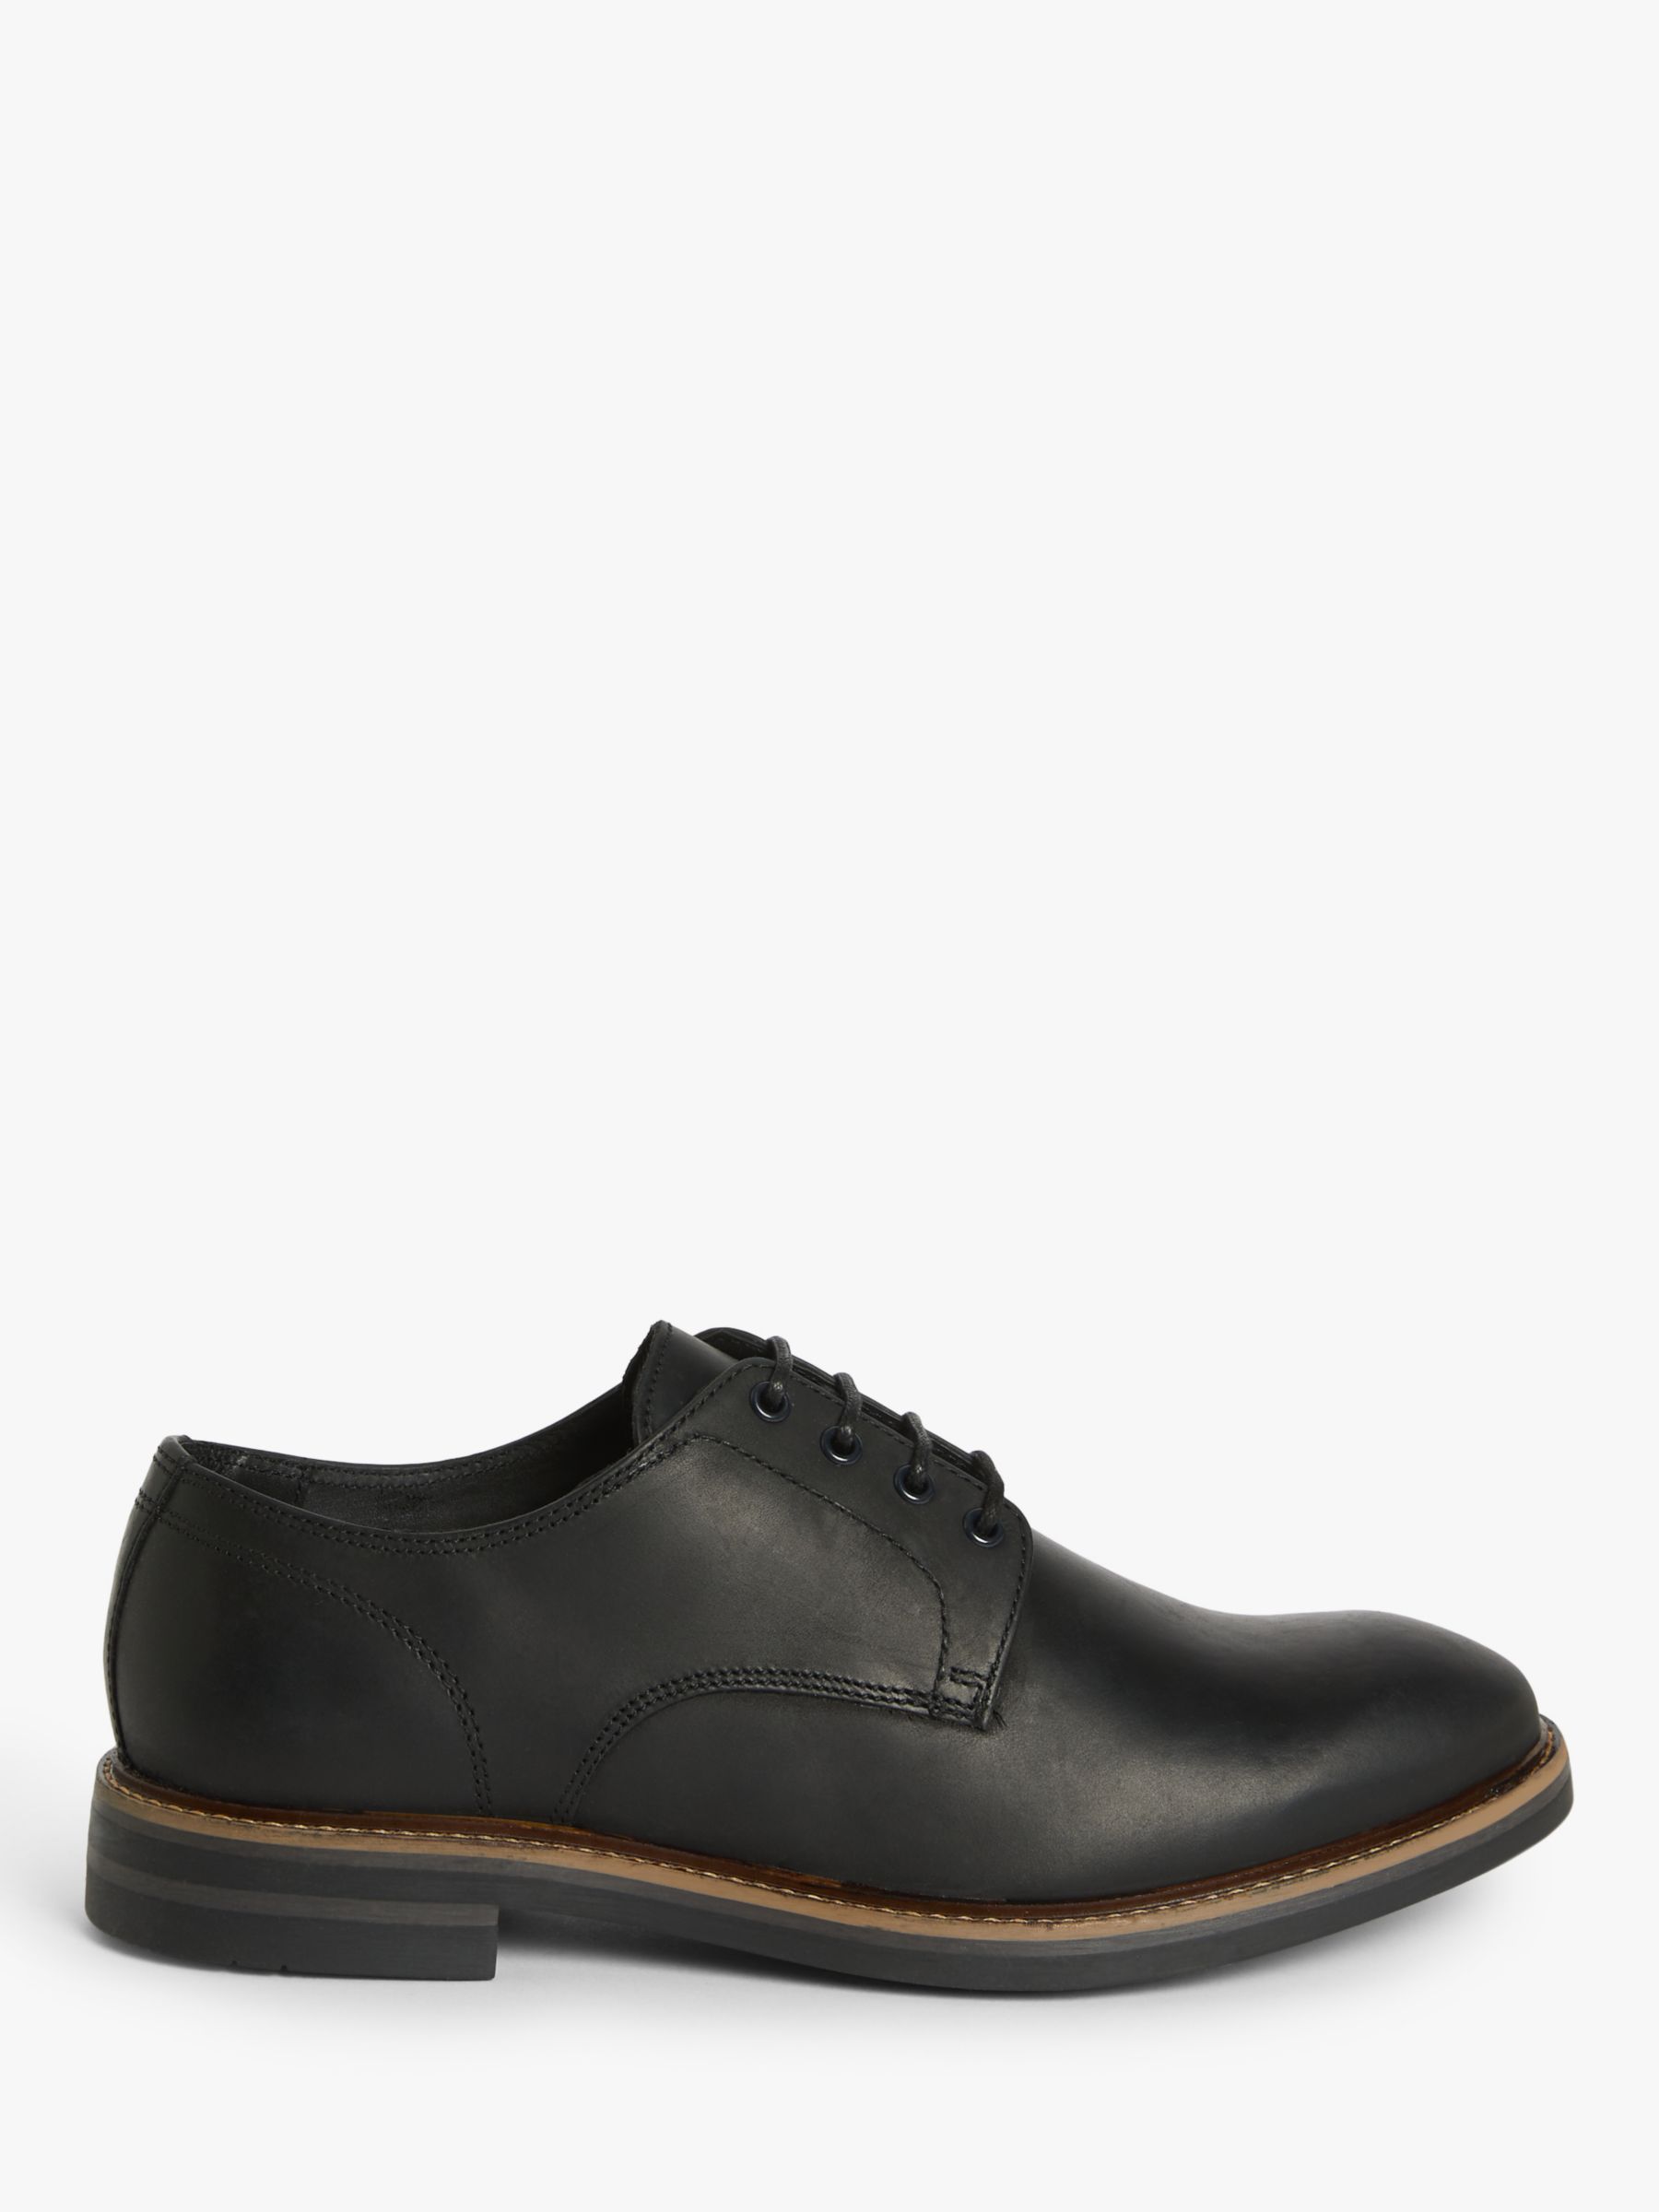 John Lewis & Partners Country Derby Shoes, Black at John Lewis & Partners